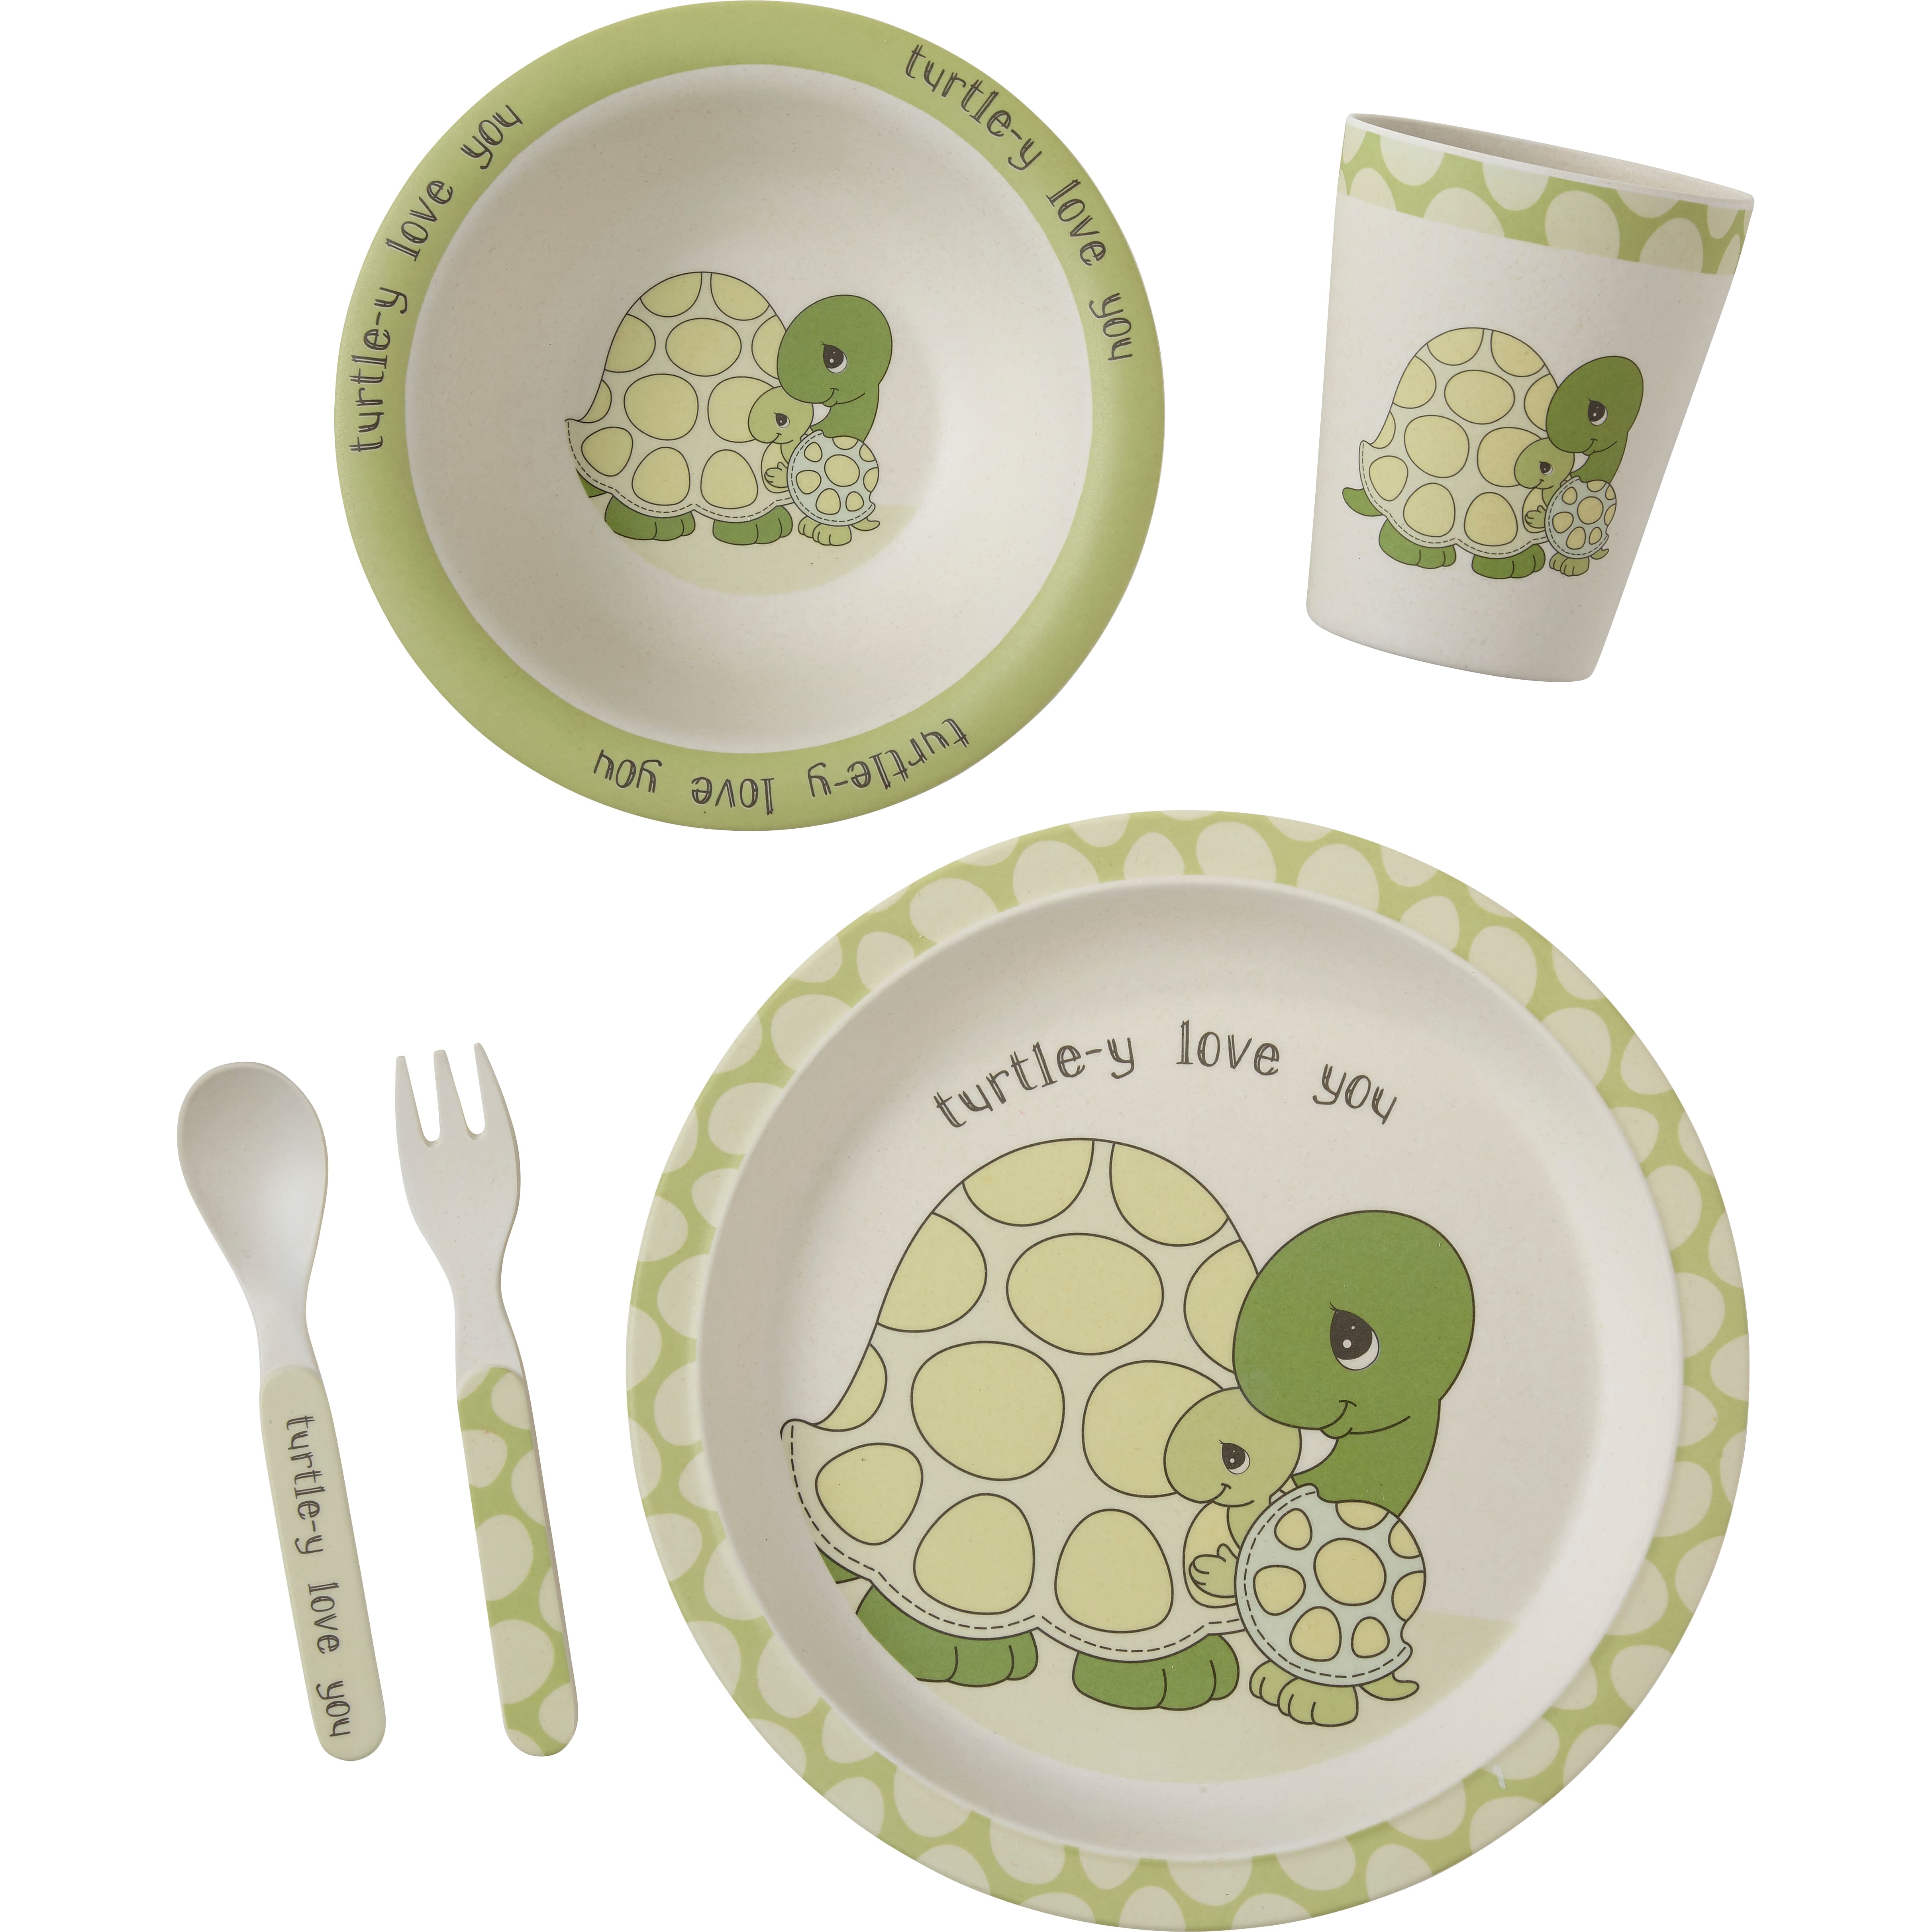 Precious Moments Turtle-y Love You Bamboo 5-Piece Mealtime Gift Set